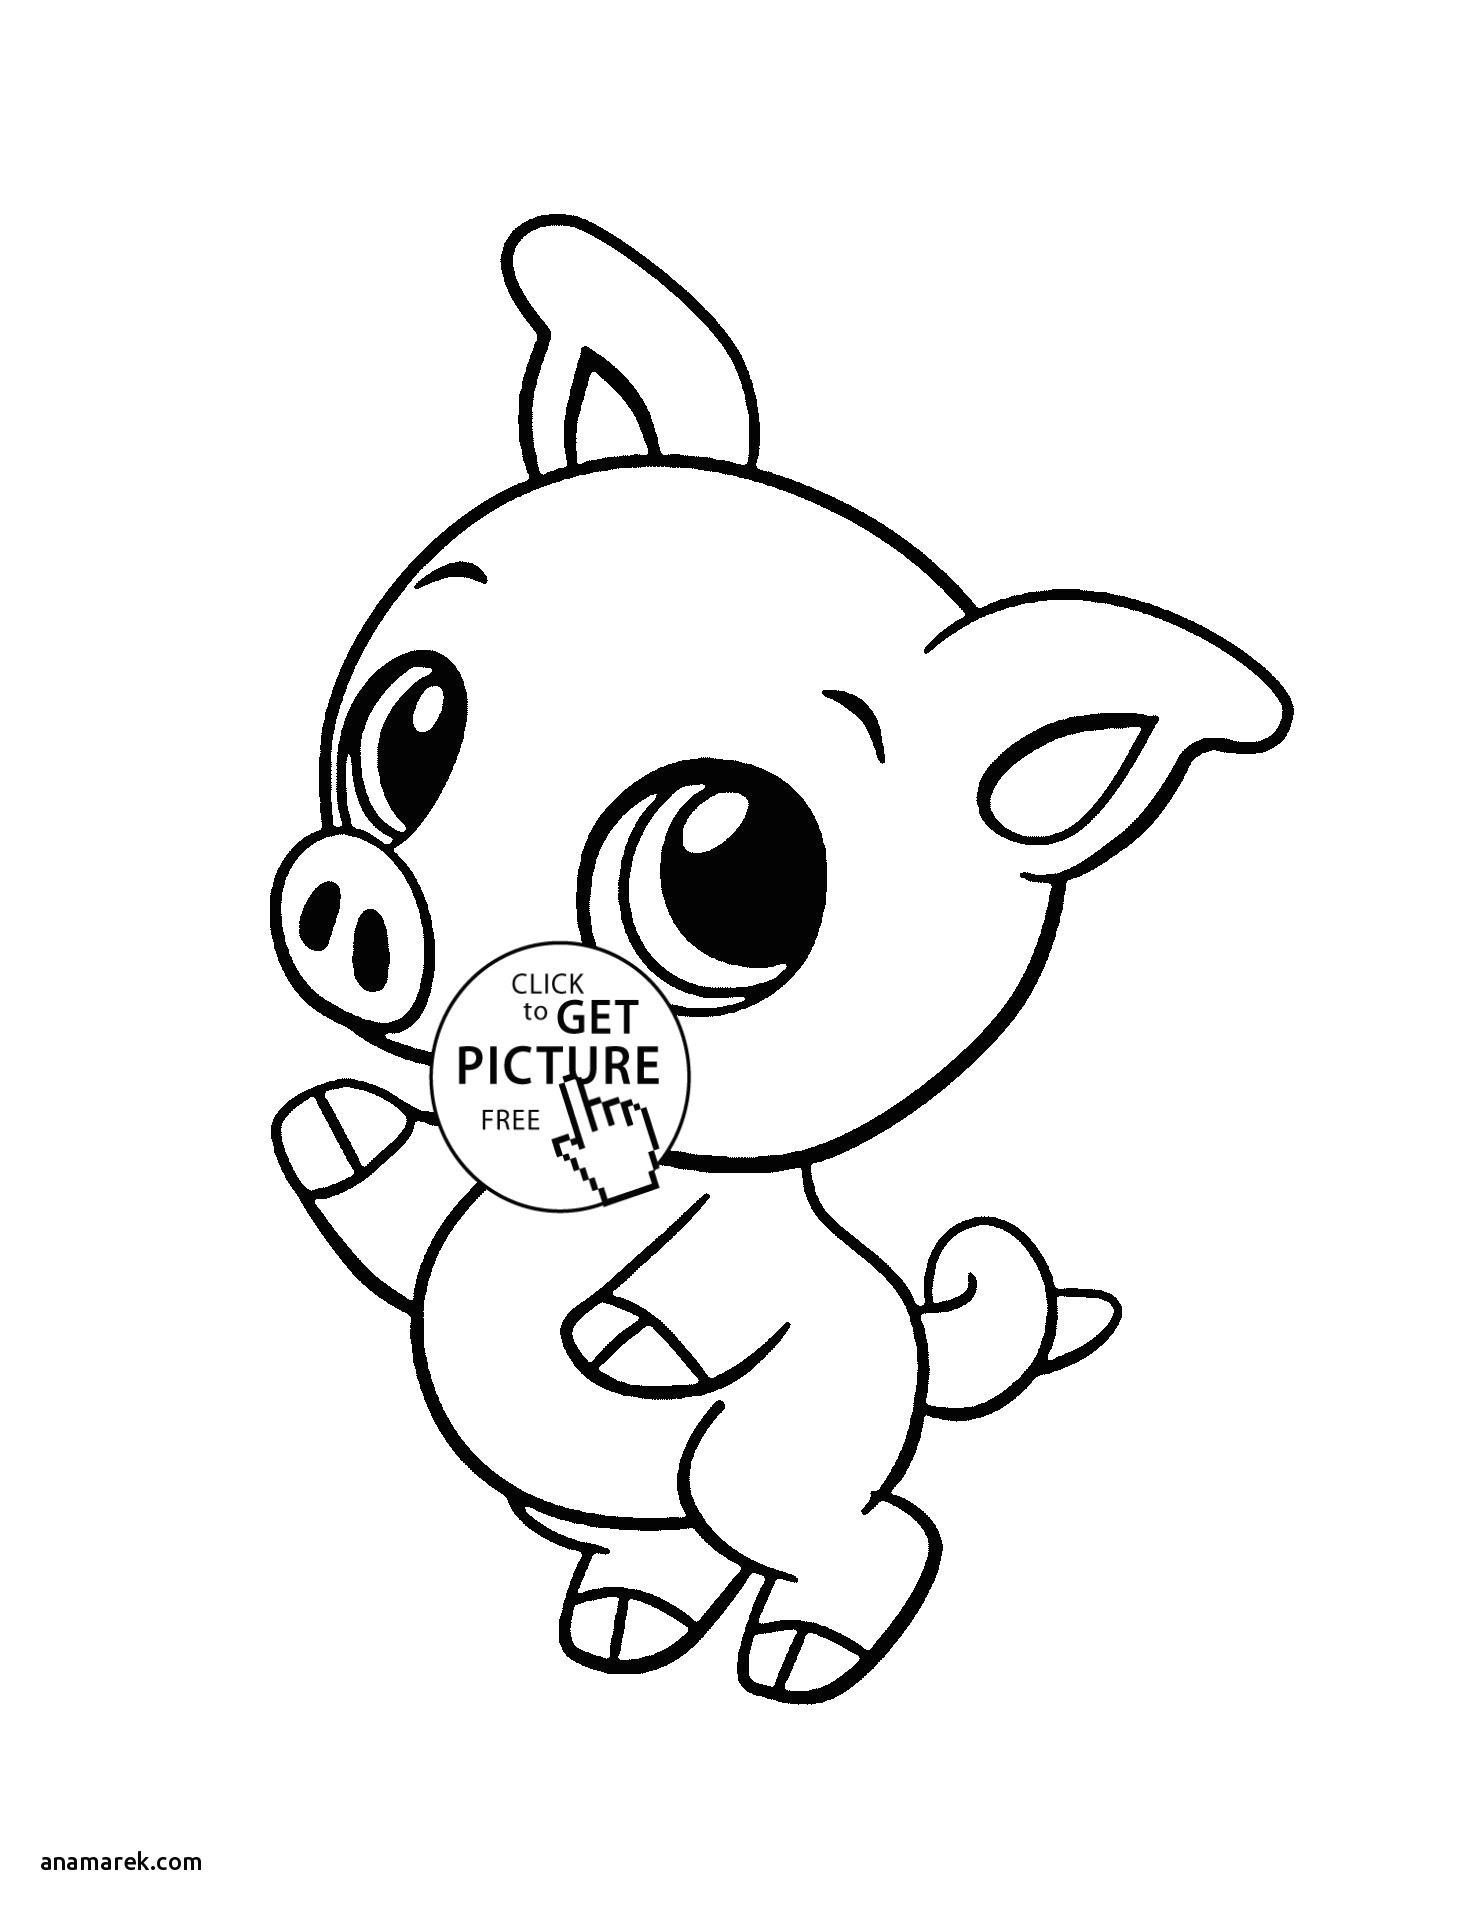 Drawing Cute Animal Eyes Cute Baby Zoo Animals Coloring Pages Inspirational Free Coloring